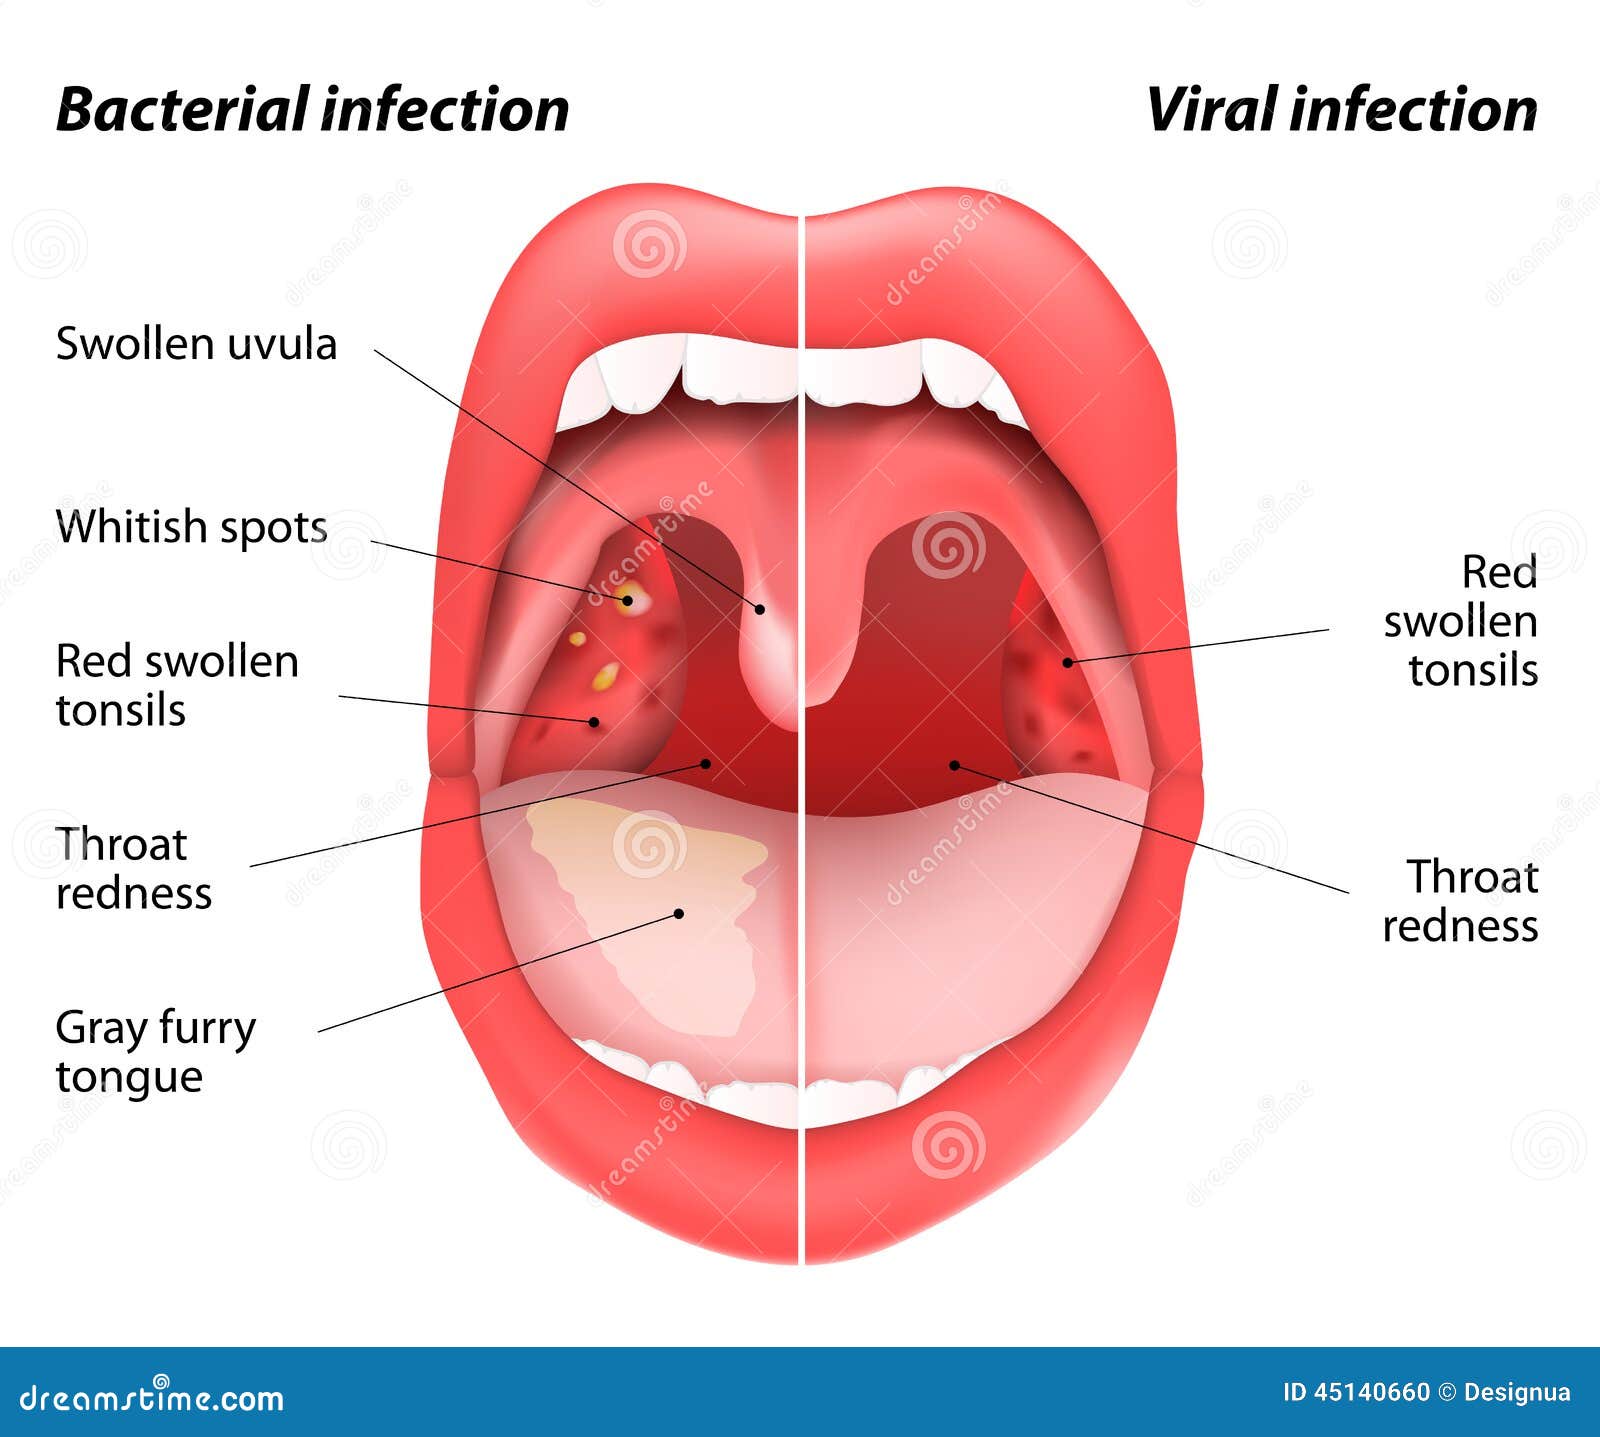 the differences between viral and bacterial infections